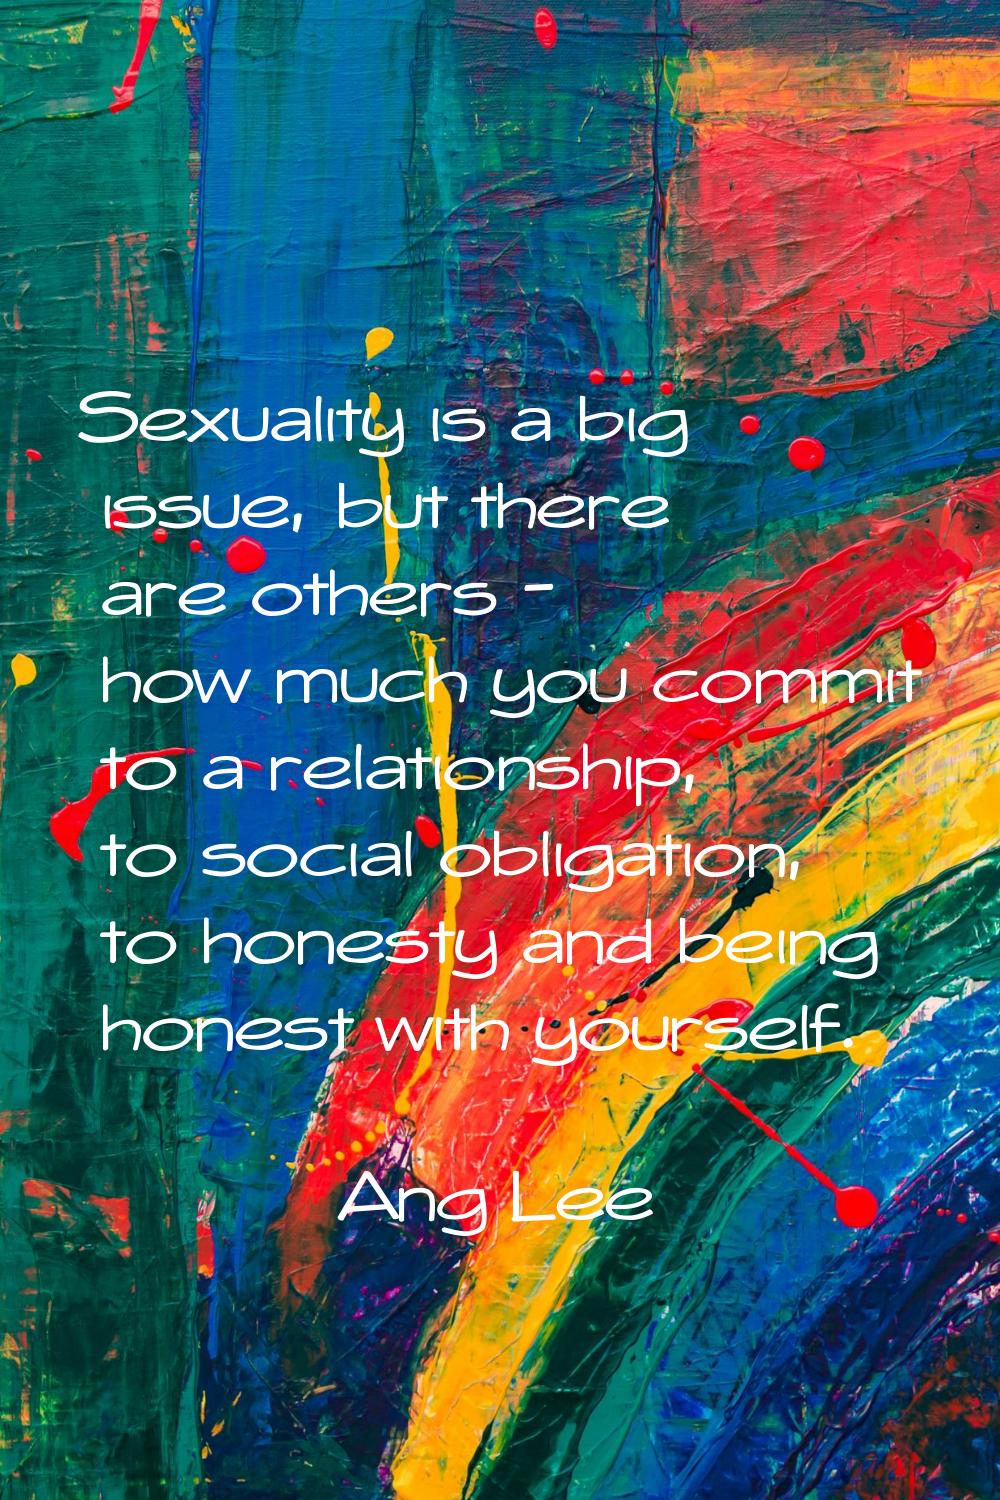 Sexuality is a big issue, but there are others - how much you commit to a relationship, to social o